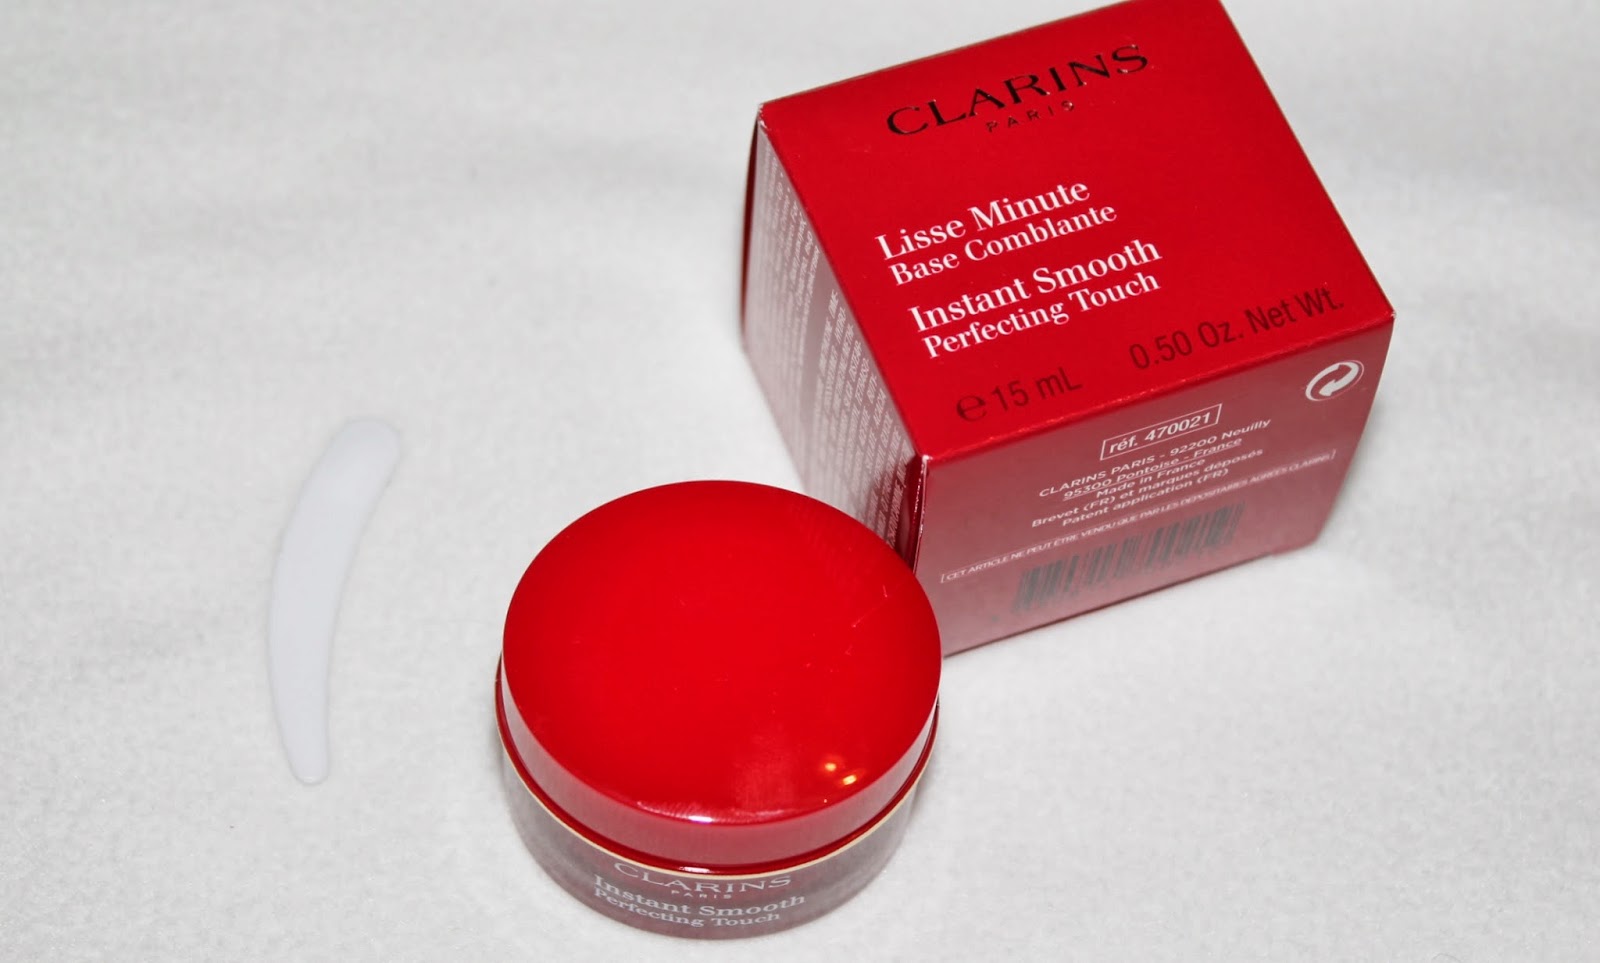 Clarins Instant Smooth Perfecting Touch - wide 7